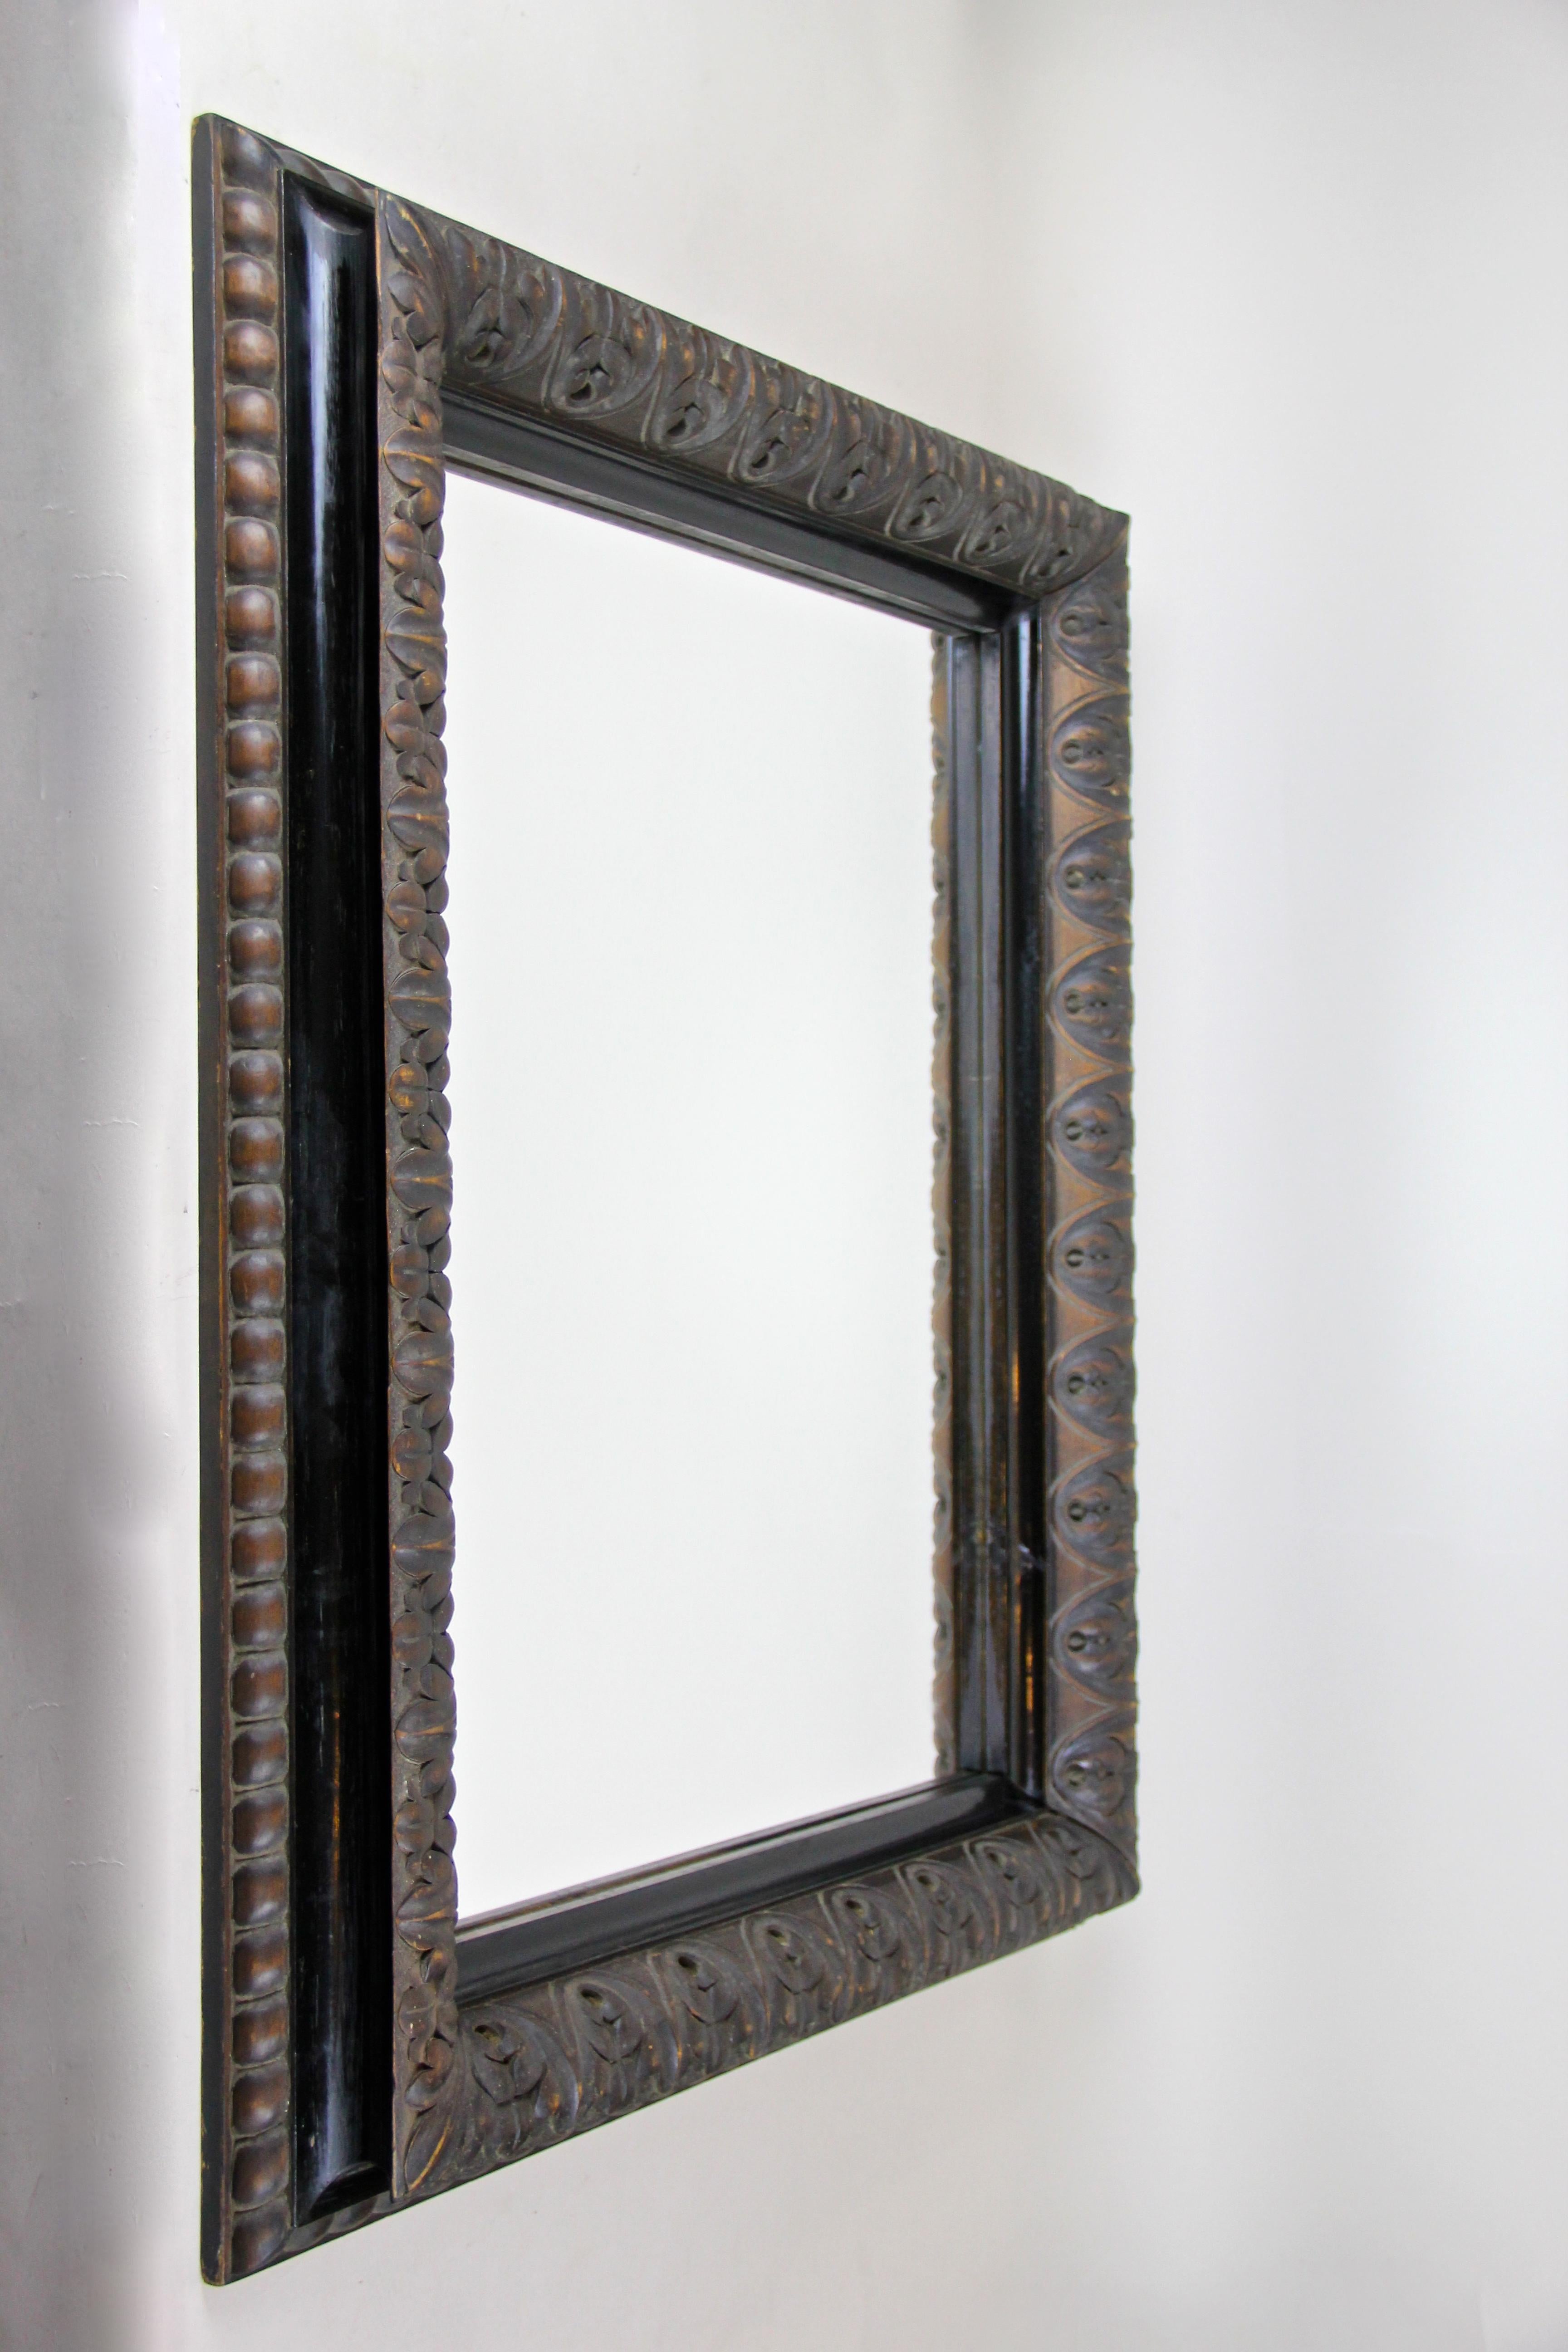 Outstanding solid wooden wall mirror from the late 19th century - the 